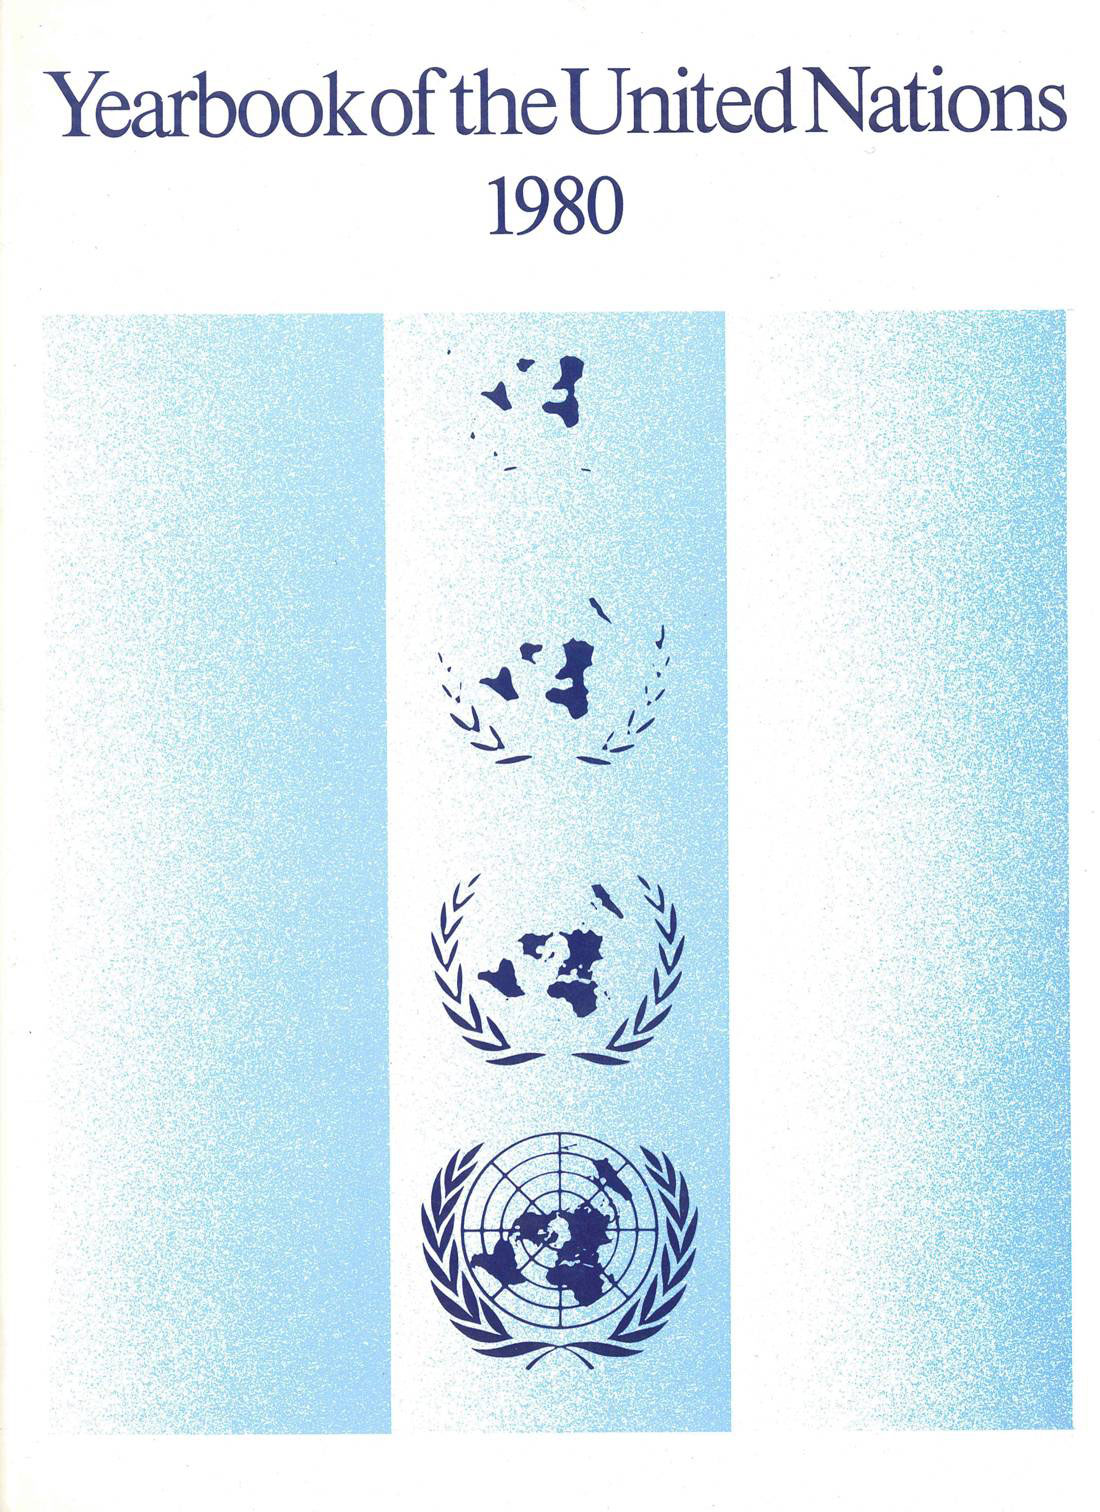 image of Yearbook of the United Nations 1980